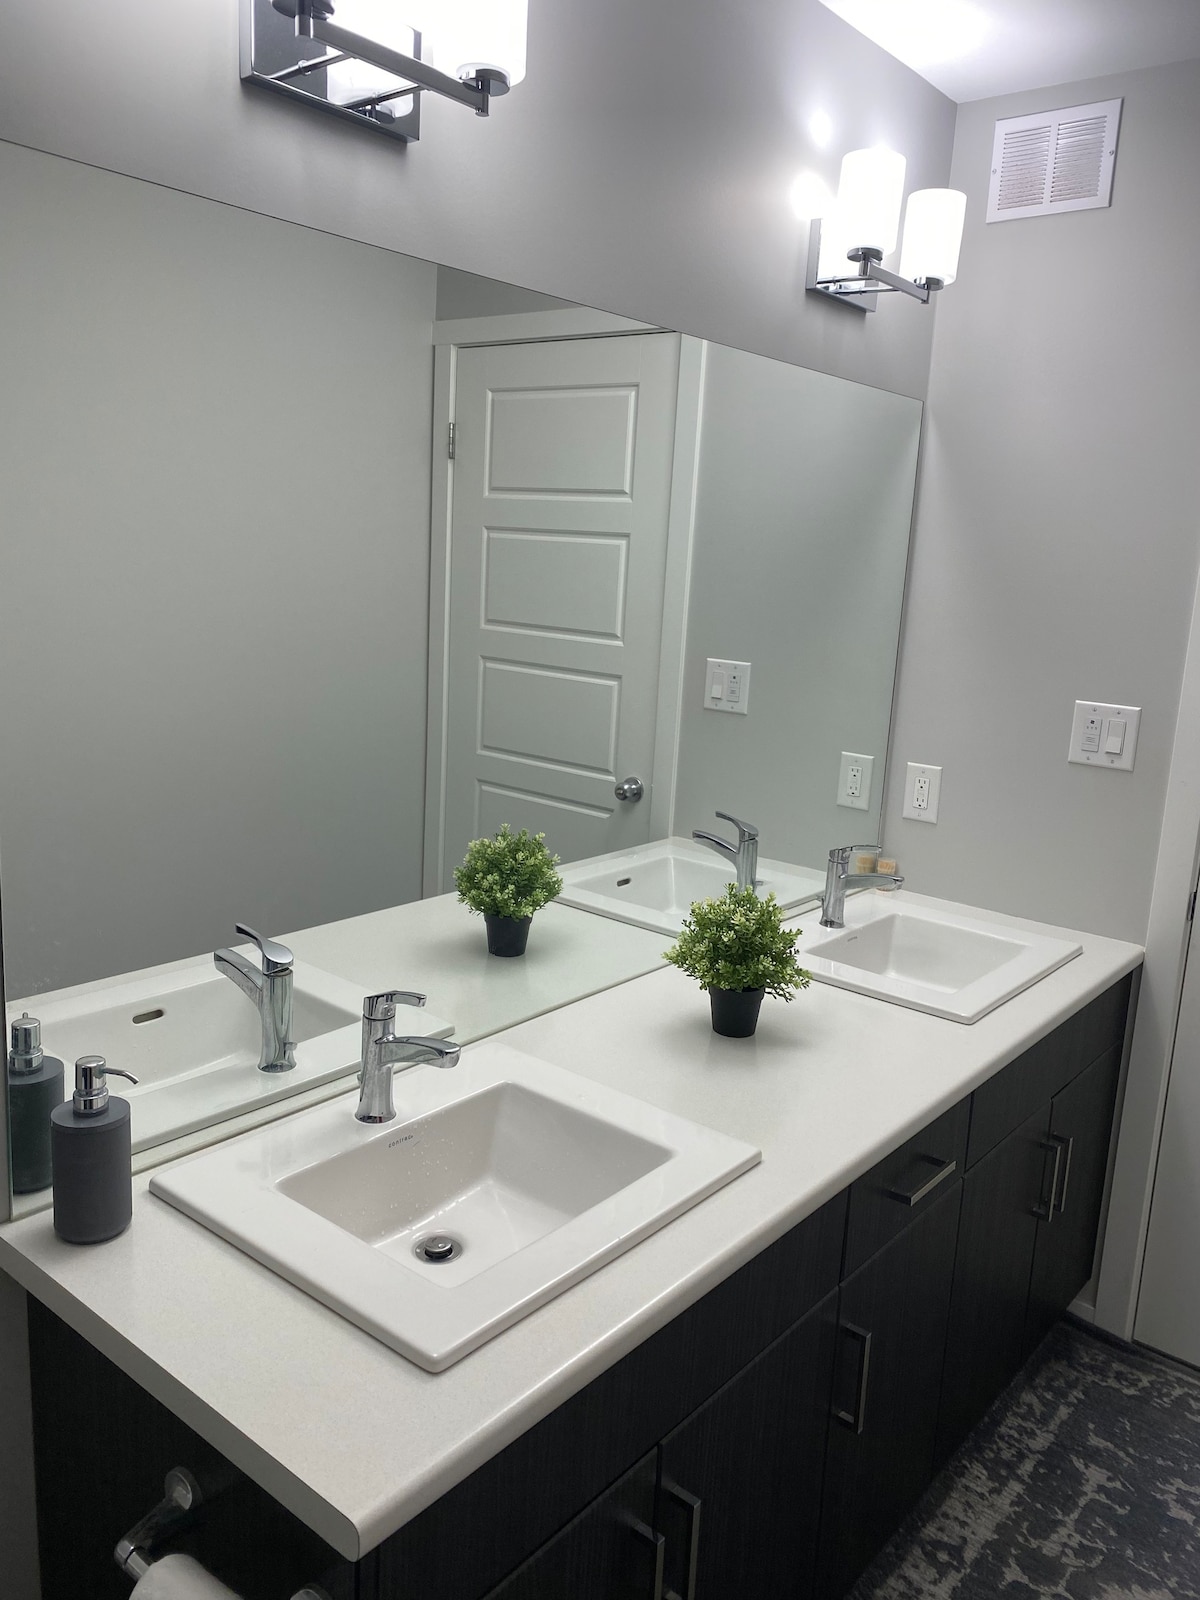 Large room attached bathroom